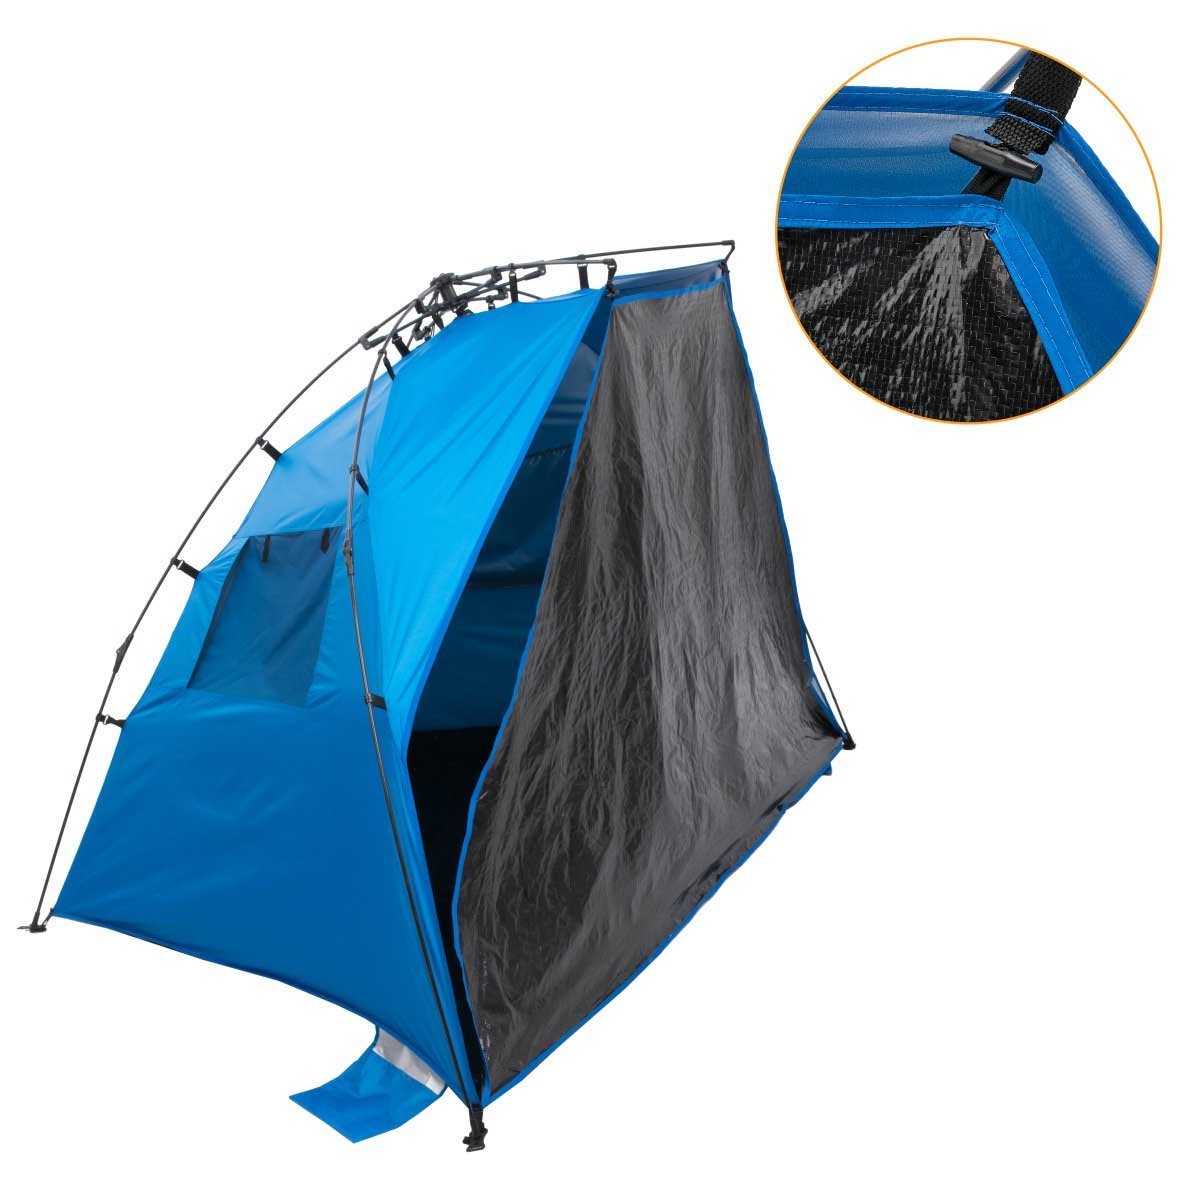 4 Person Large Easy Up Beach Tent Sun Shade Shelter UPF 50+ could be fully closed with the help of extended floor space guaranteeing you privacy